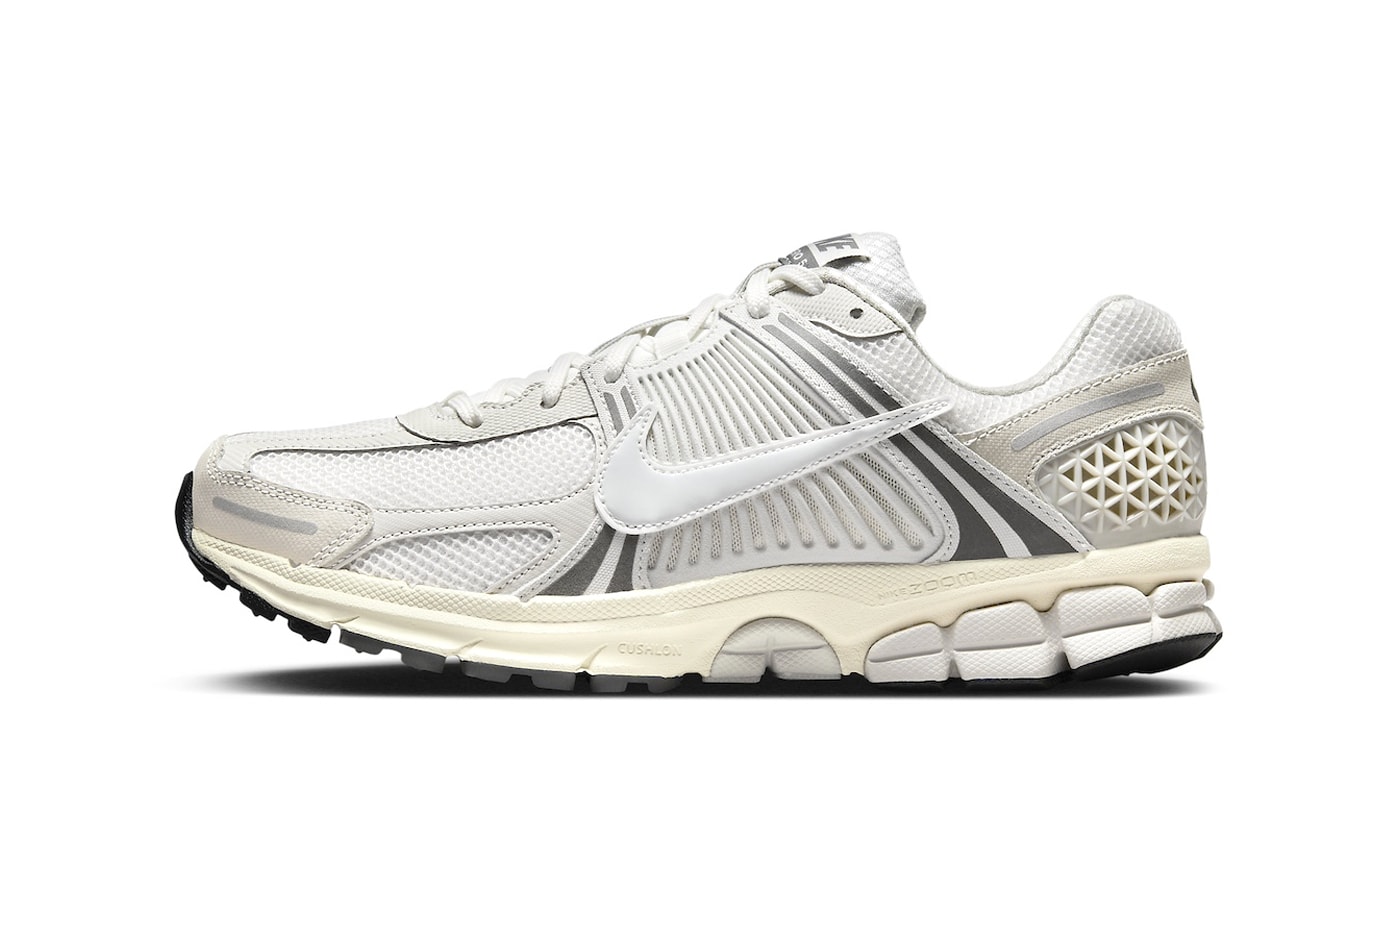 Nike Zoom Vomero 5 Surfaces in a Clean "Platinum Tint" HF0731-007 dad shoe sneaker comfortable everyday shoe